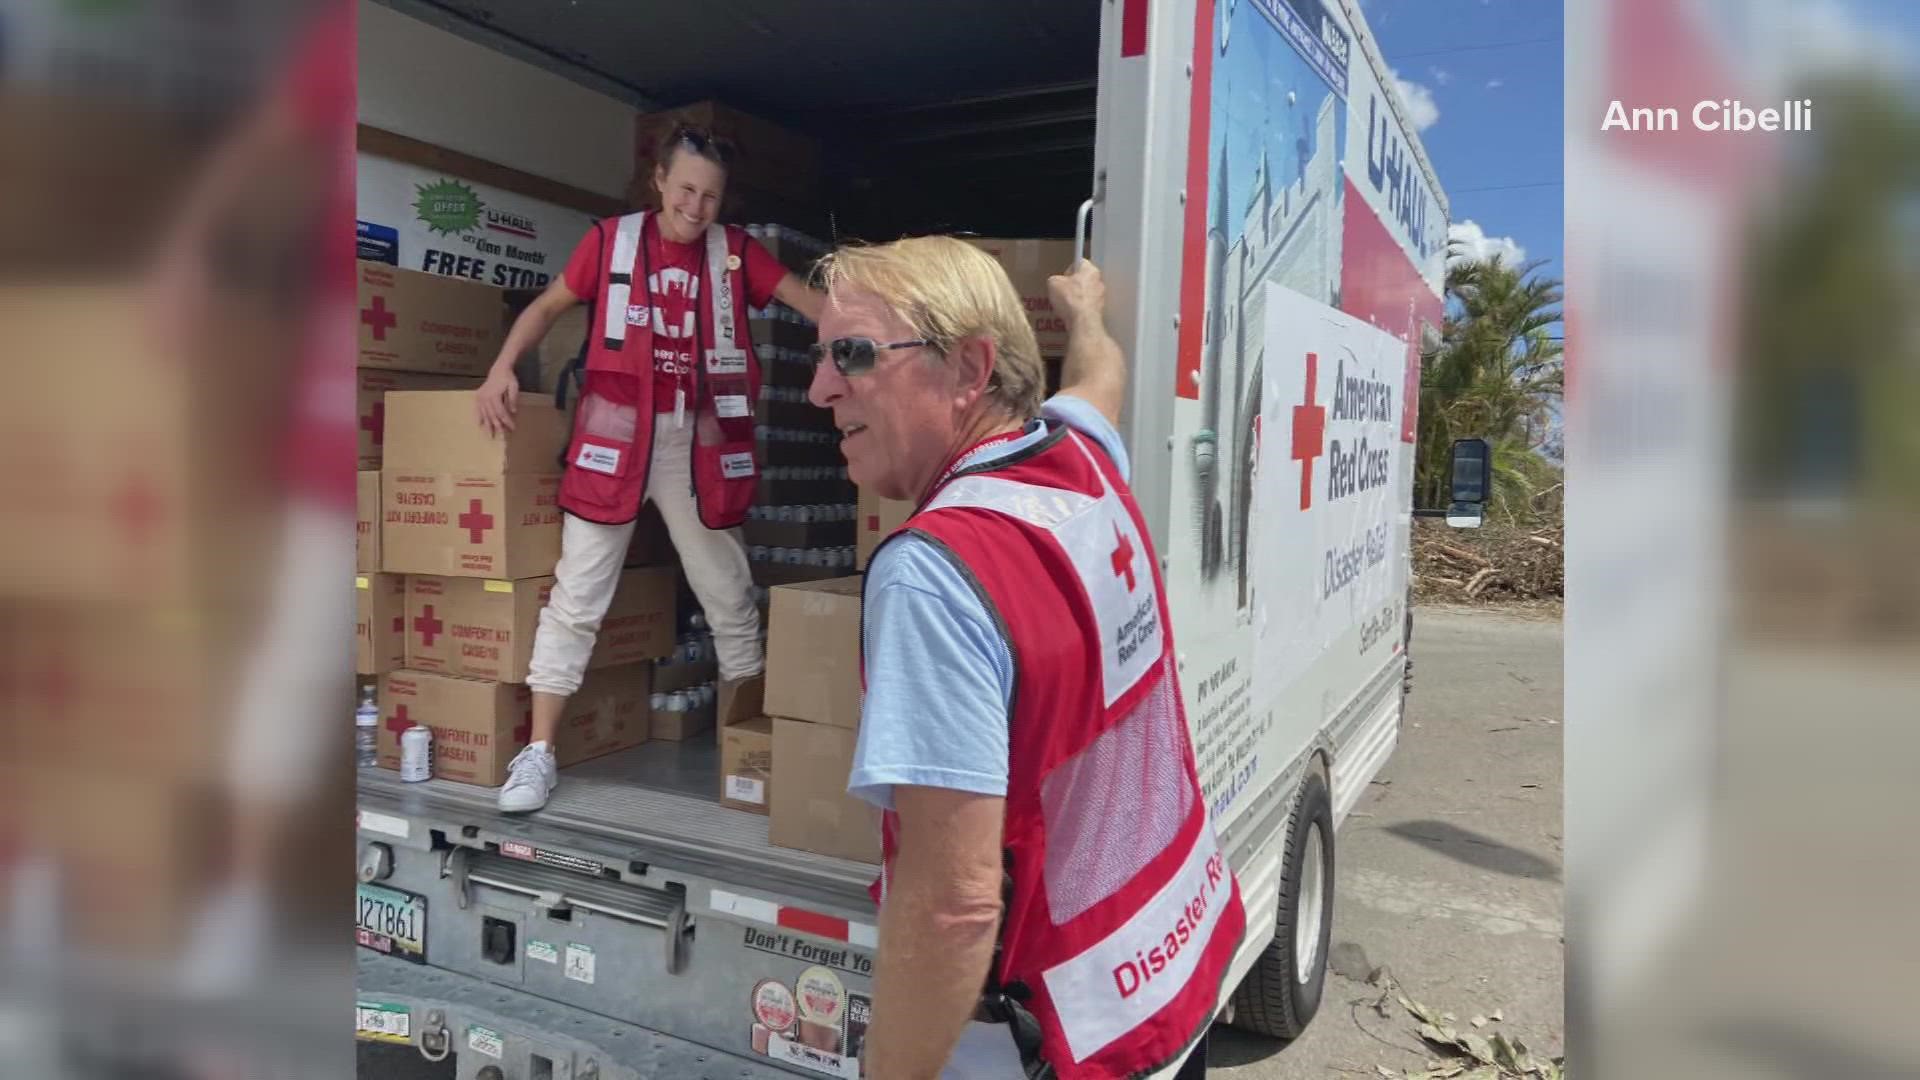 Bob and Ann Cibelli of Acton spent two weeks volunteering for the American Red Cross in some of the areas hit hardest by the hurricane.